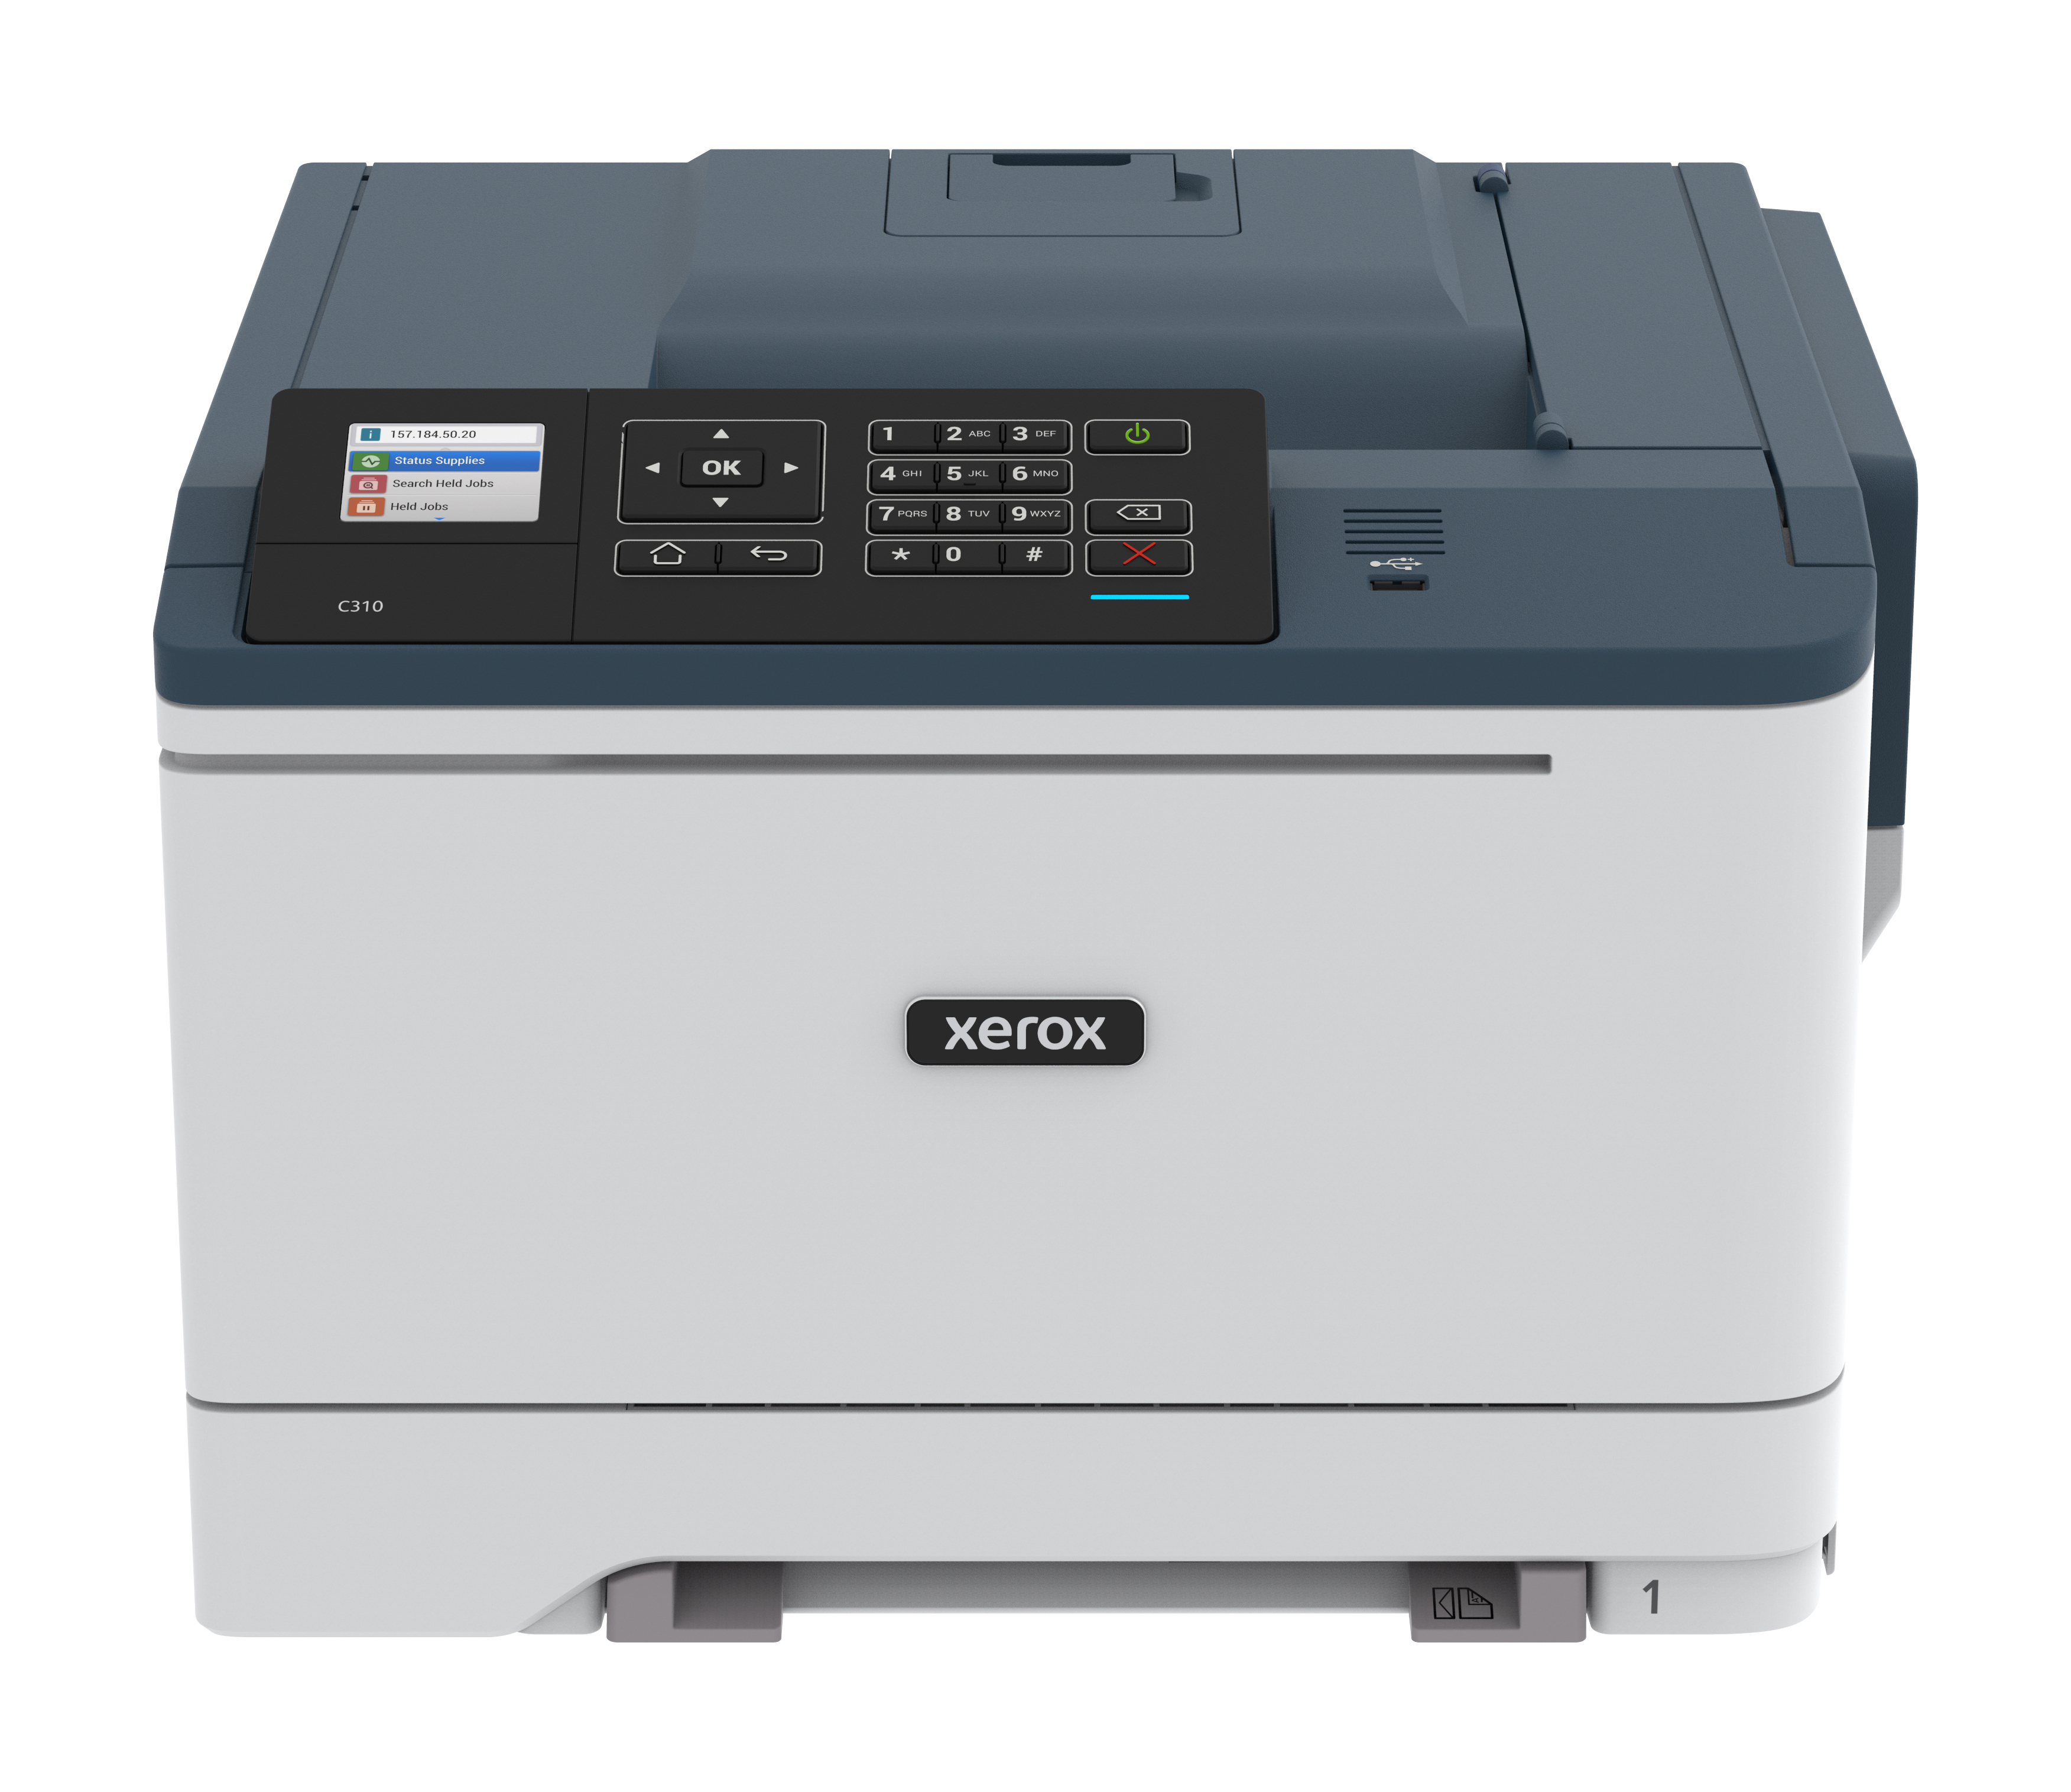 Xerox C310 Color Printer, Up To 35ppm, Letter/Legal, Automatic 2-Sided  Print, USB/Ethernet/Wi-Fi, 250-Sheet Tray, 110V C310/DNI - Xerox